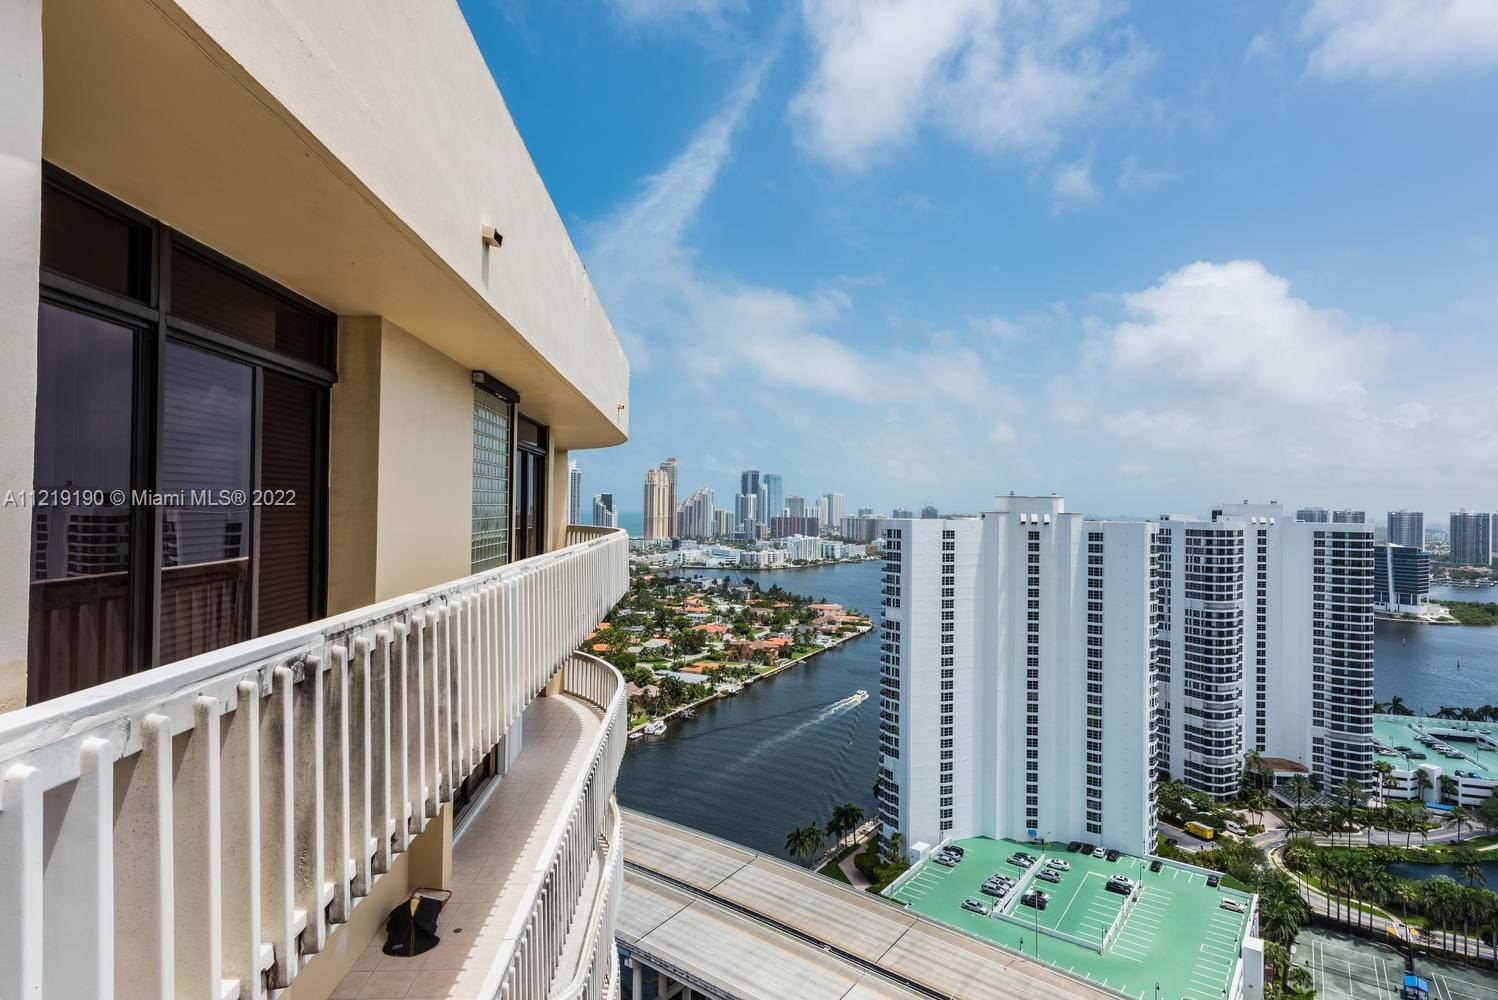 TURNBERRY TOWER IS LOCATED NEAR LUXURIOUS AVENTURA CIRCLE. APT TWF IS A MAGNIFICENT PENTHOUSE TERRAC